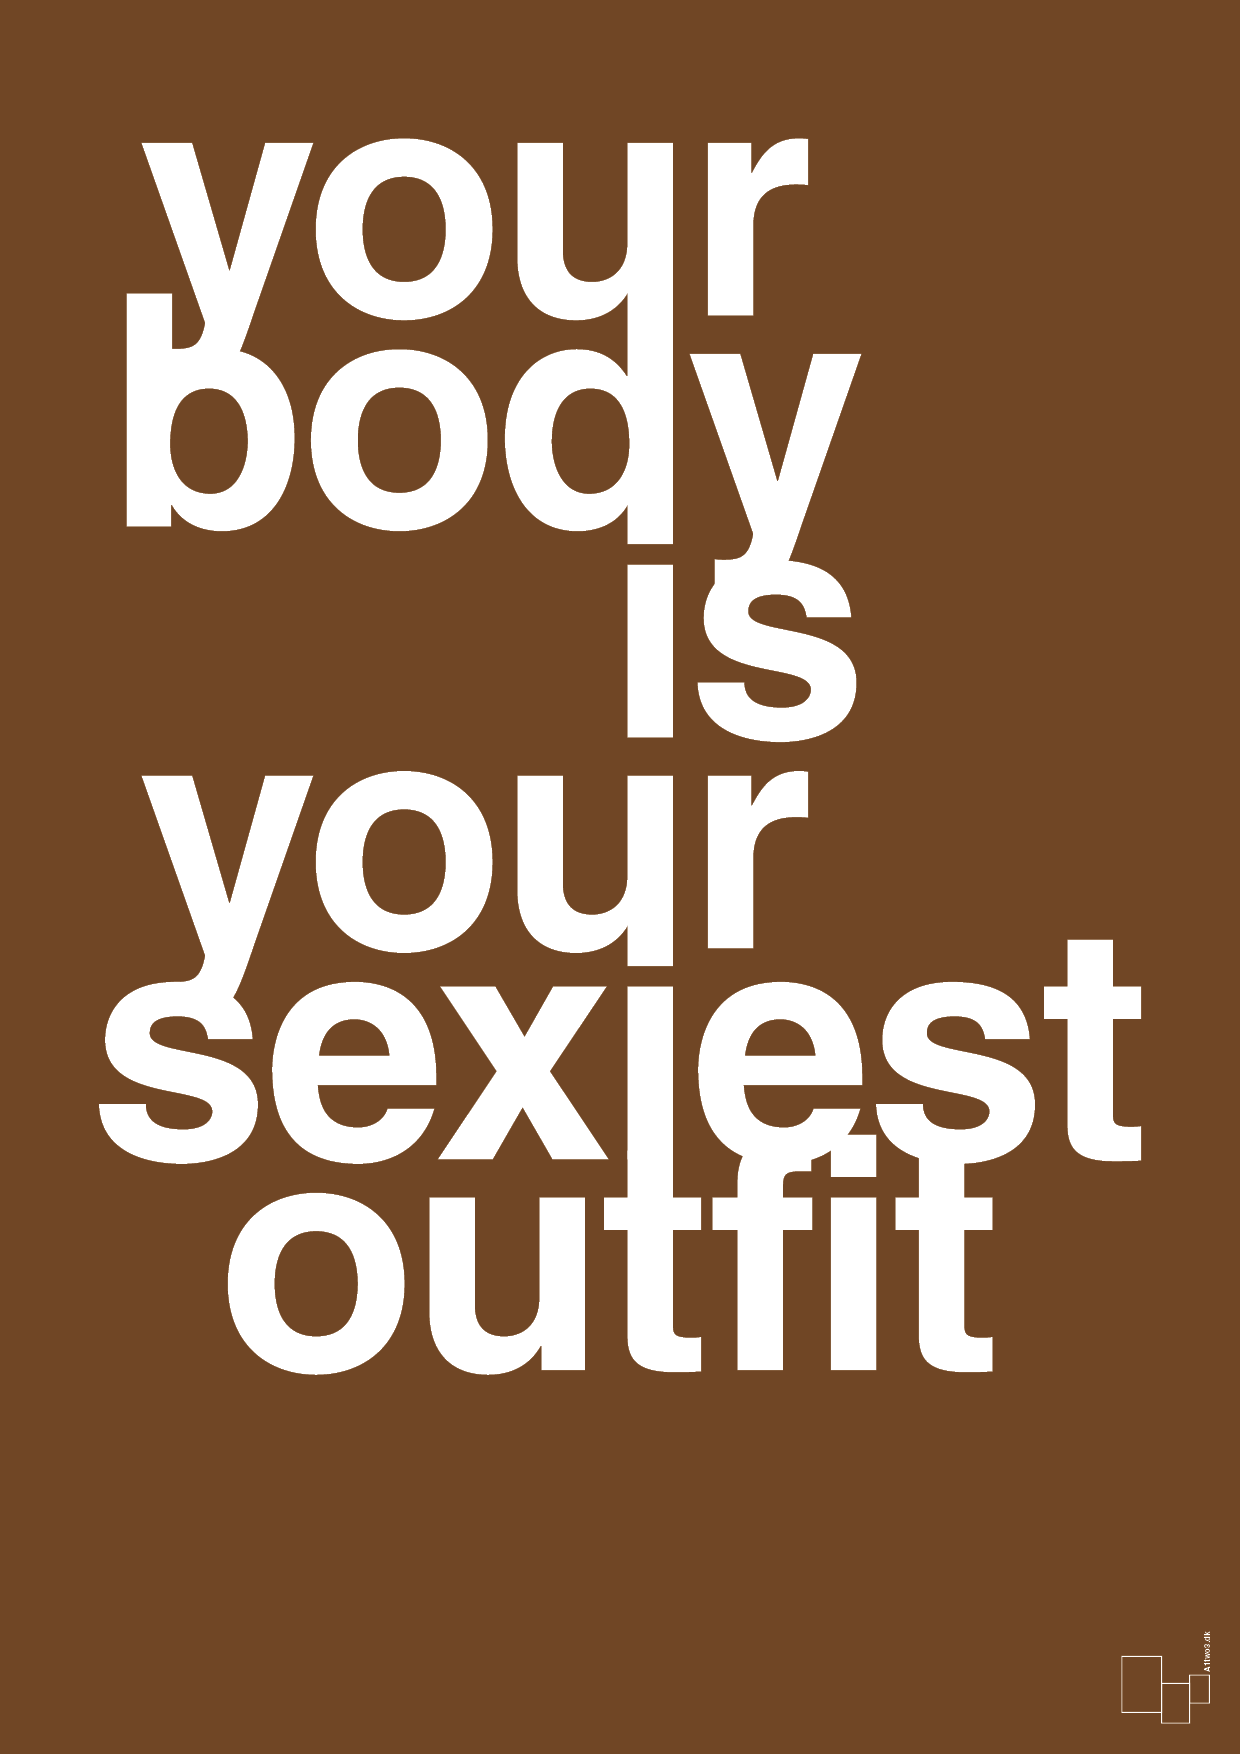 your body is your sexiest outfit - Plakat med Sport & Fritid i Dark Brown